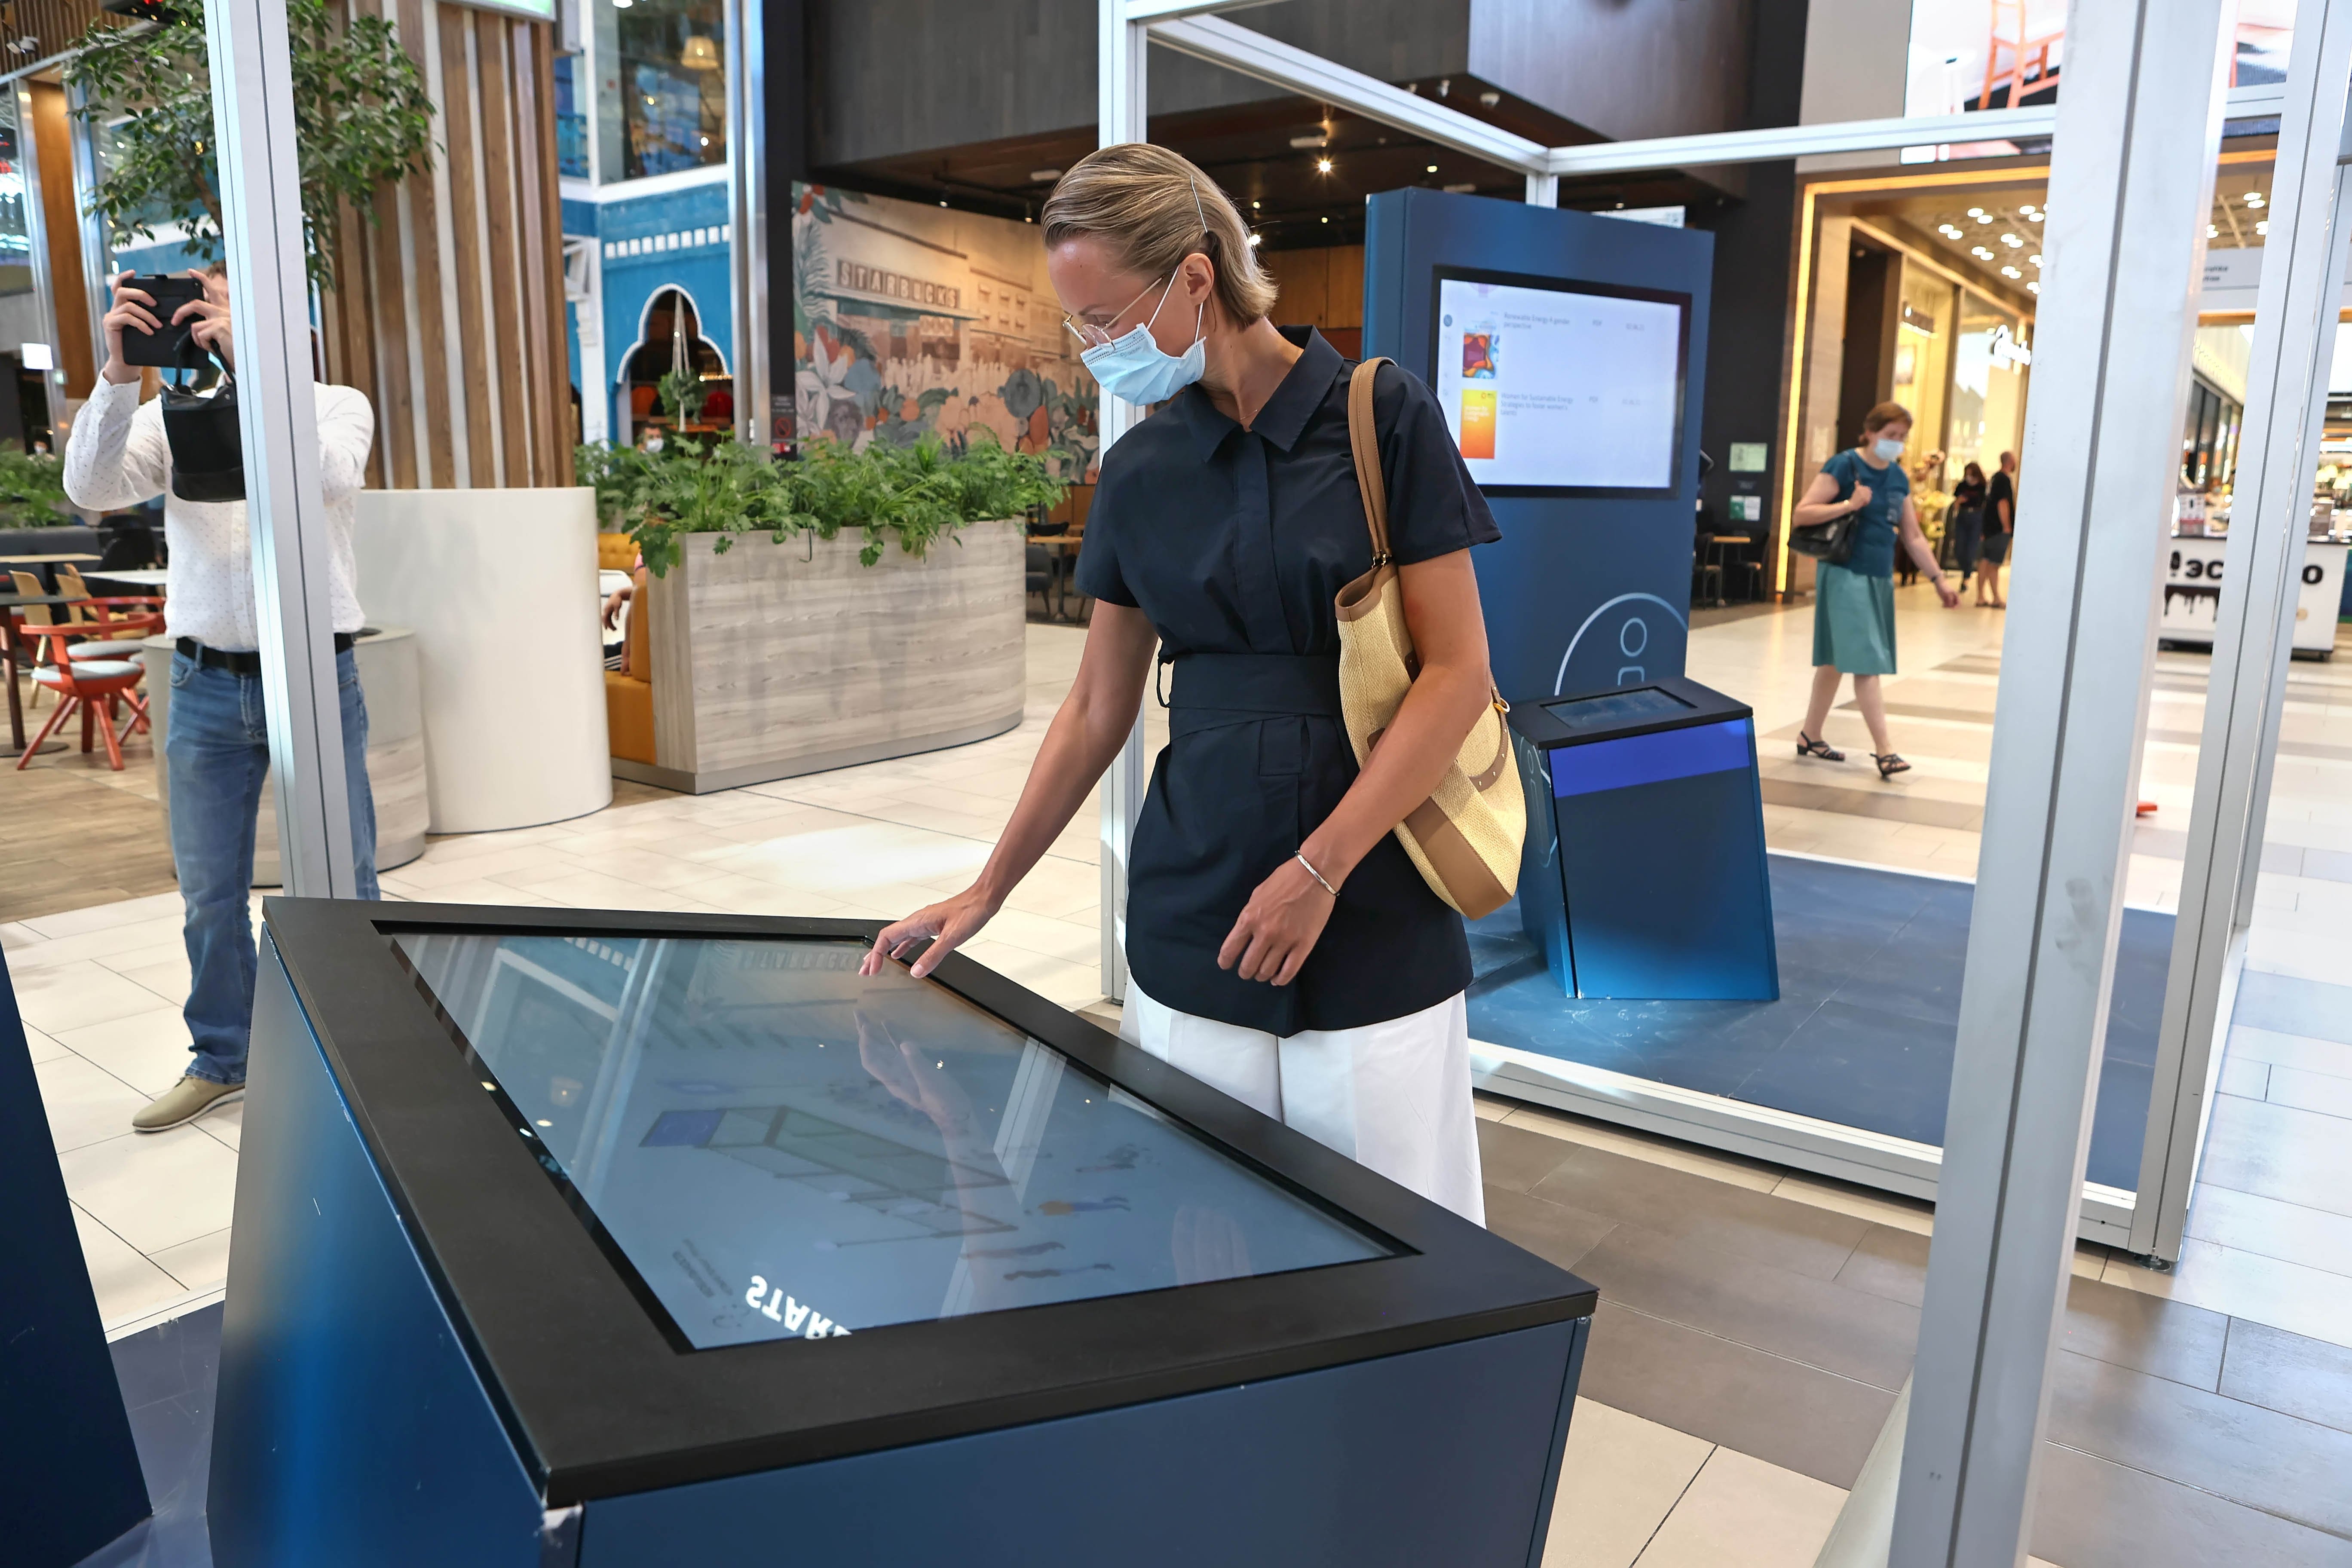 A woman is standing at a waist-high touch screen element of the station "Mobility". She is looking at the screen. In the background, there is the Info Lounge. June 2021.